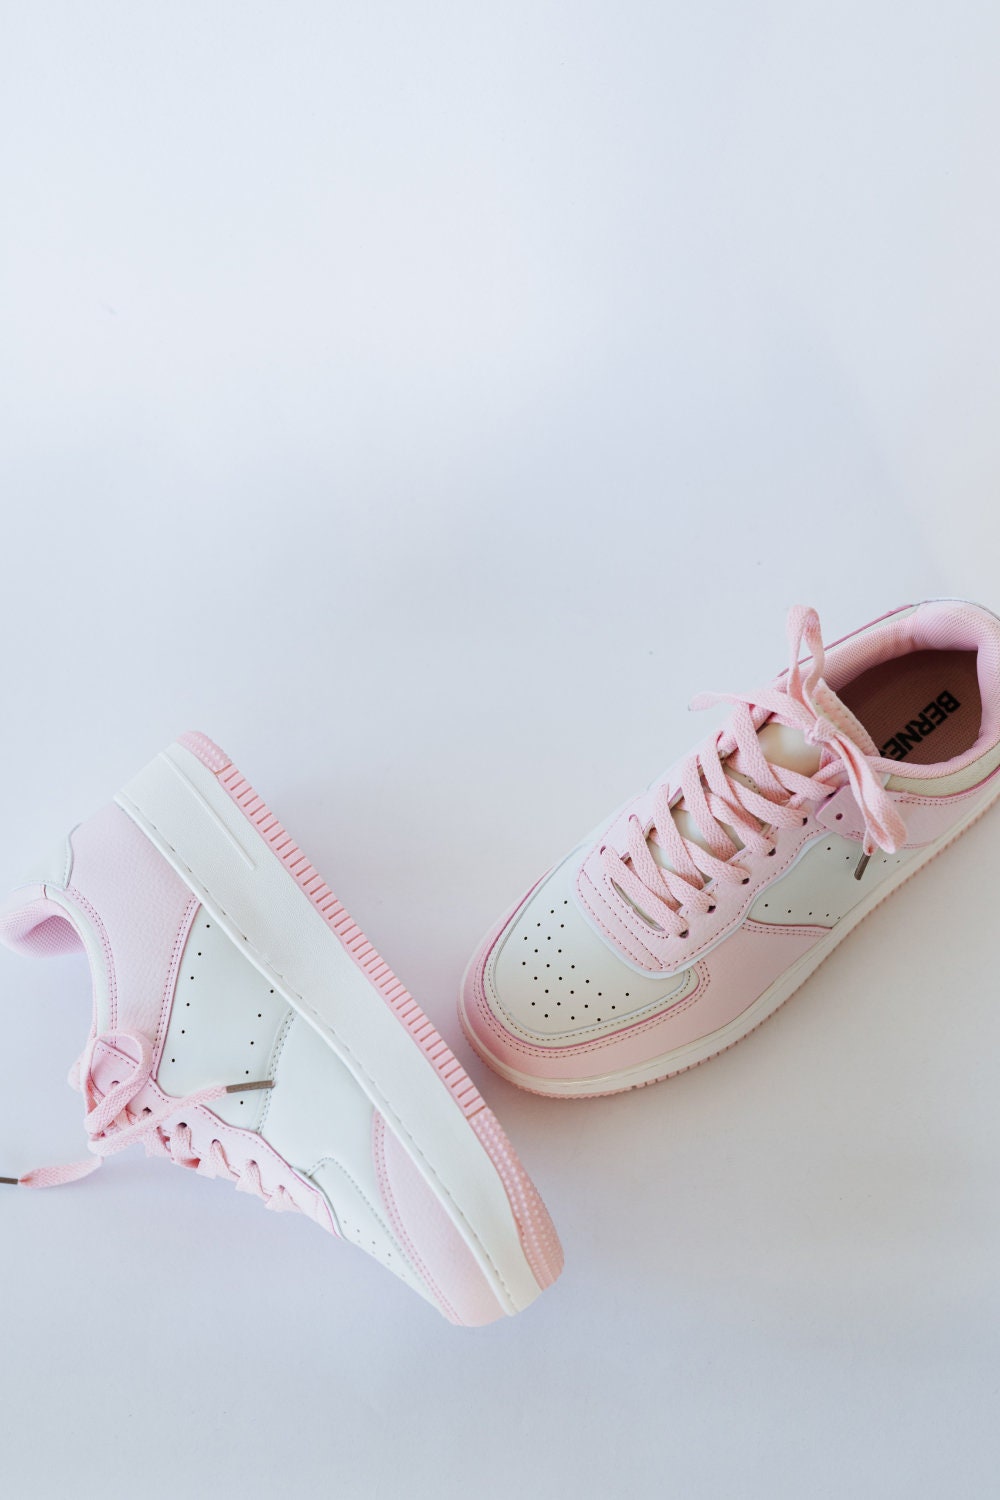 Mile a Minute Platform Sneakers in White and Pink - Etsy